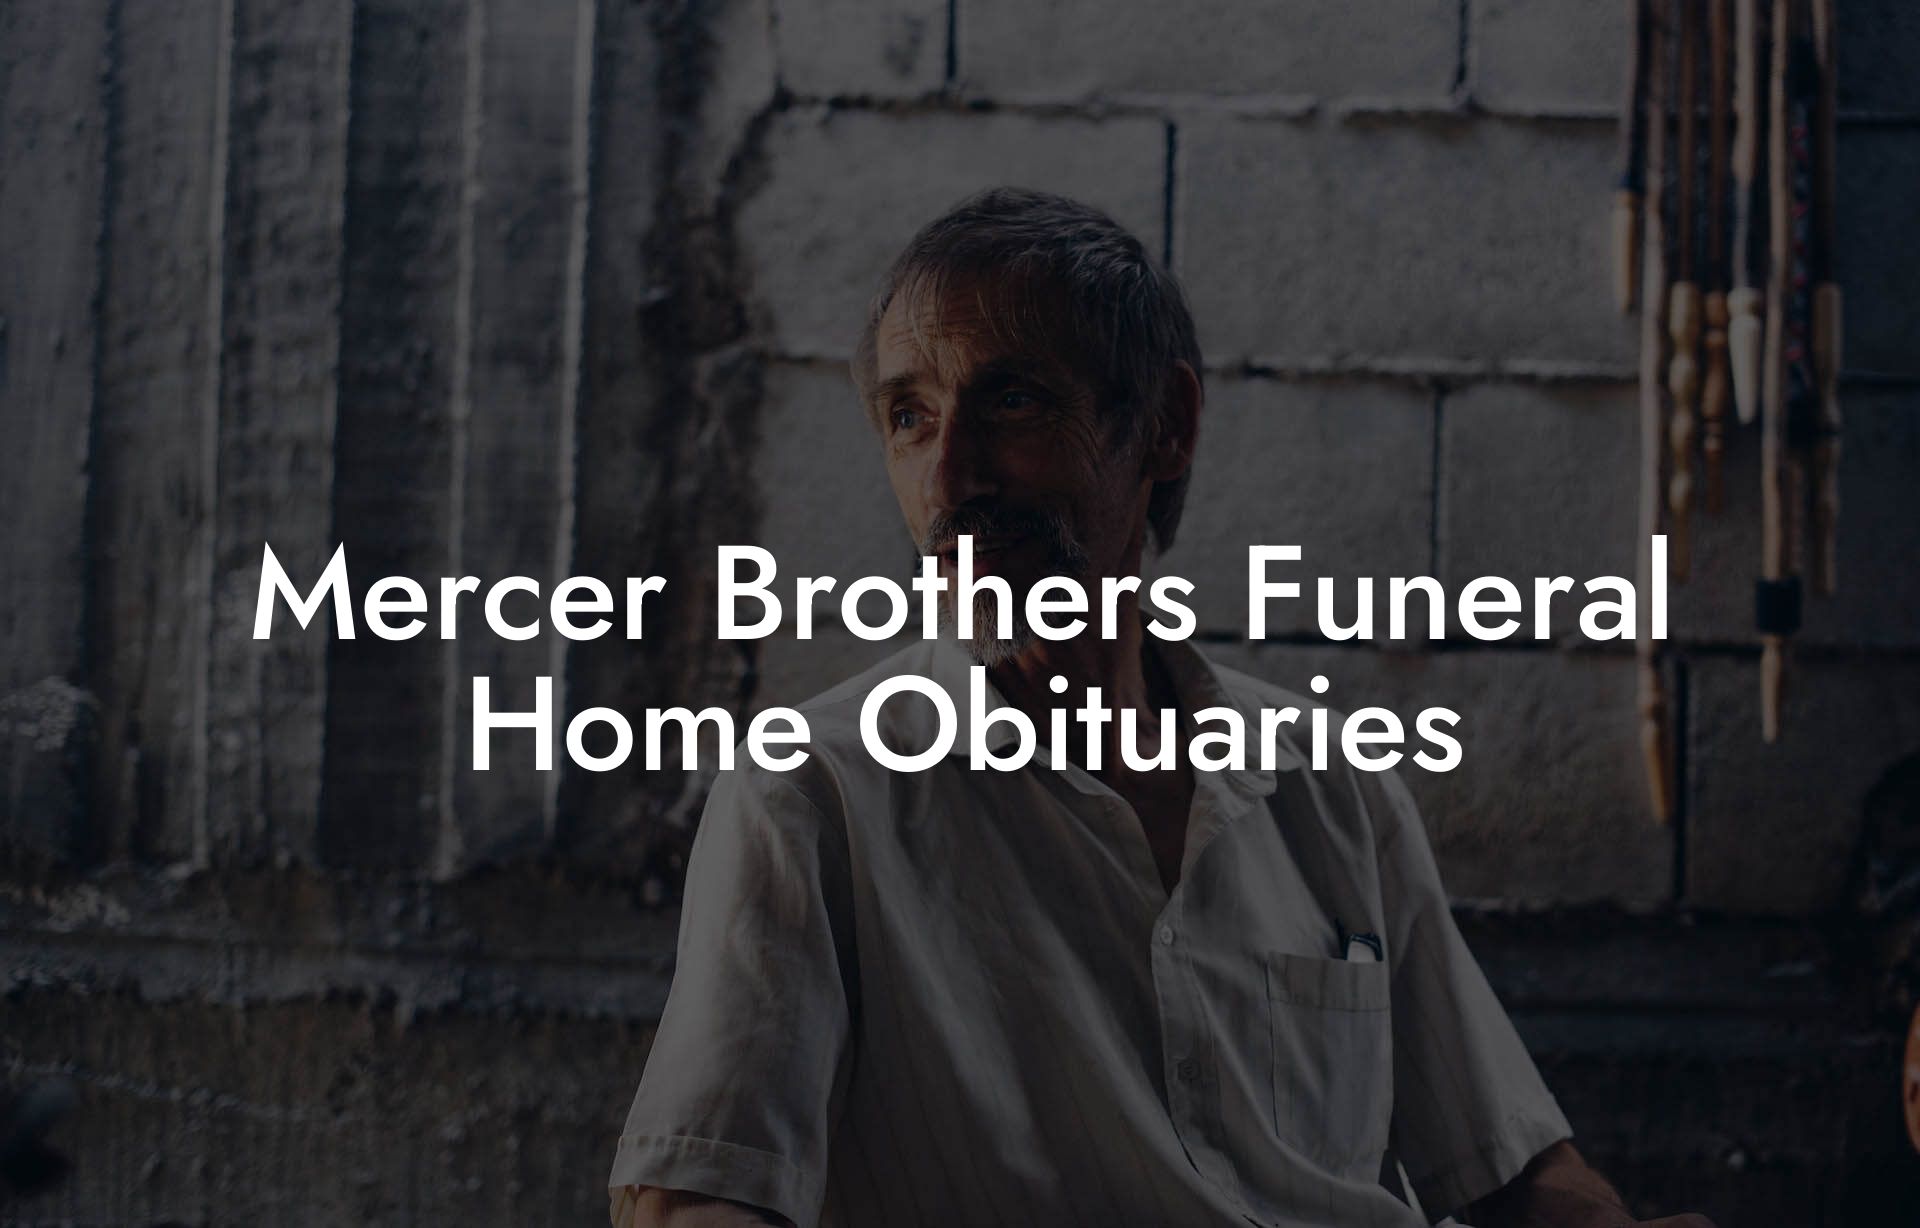 Mercer Brothers Funeral Home Obituaries